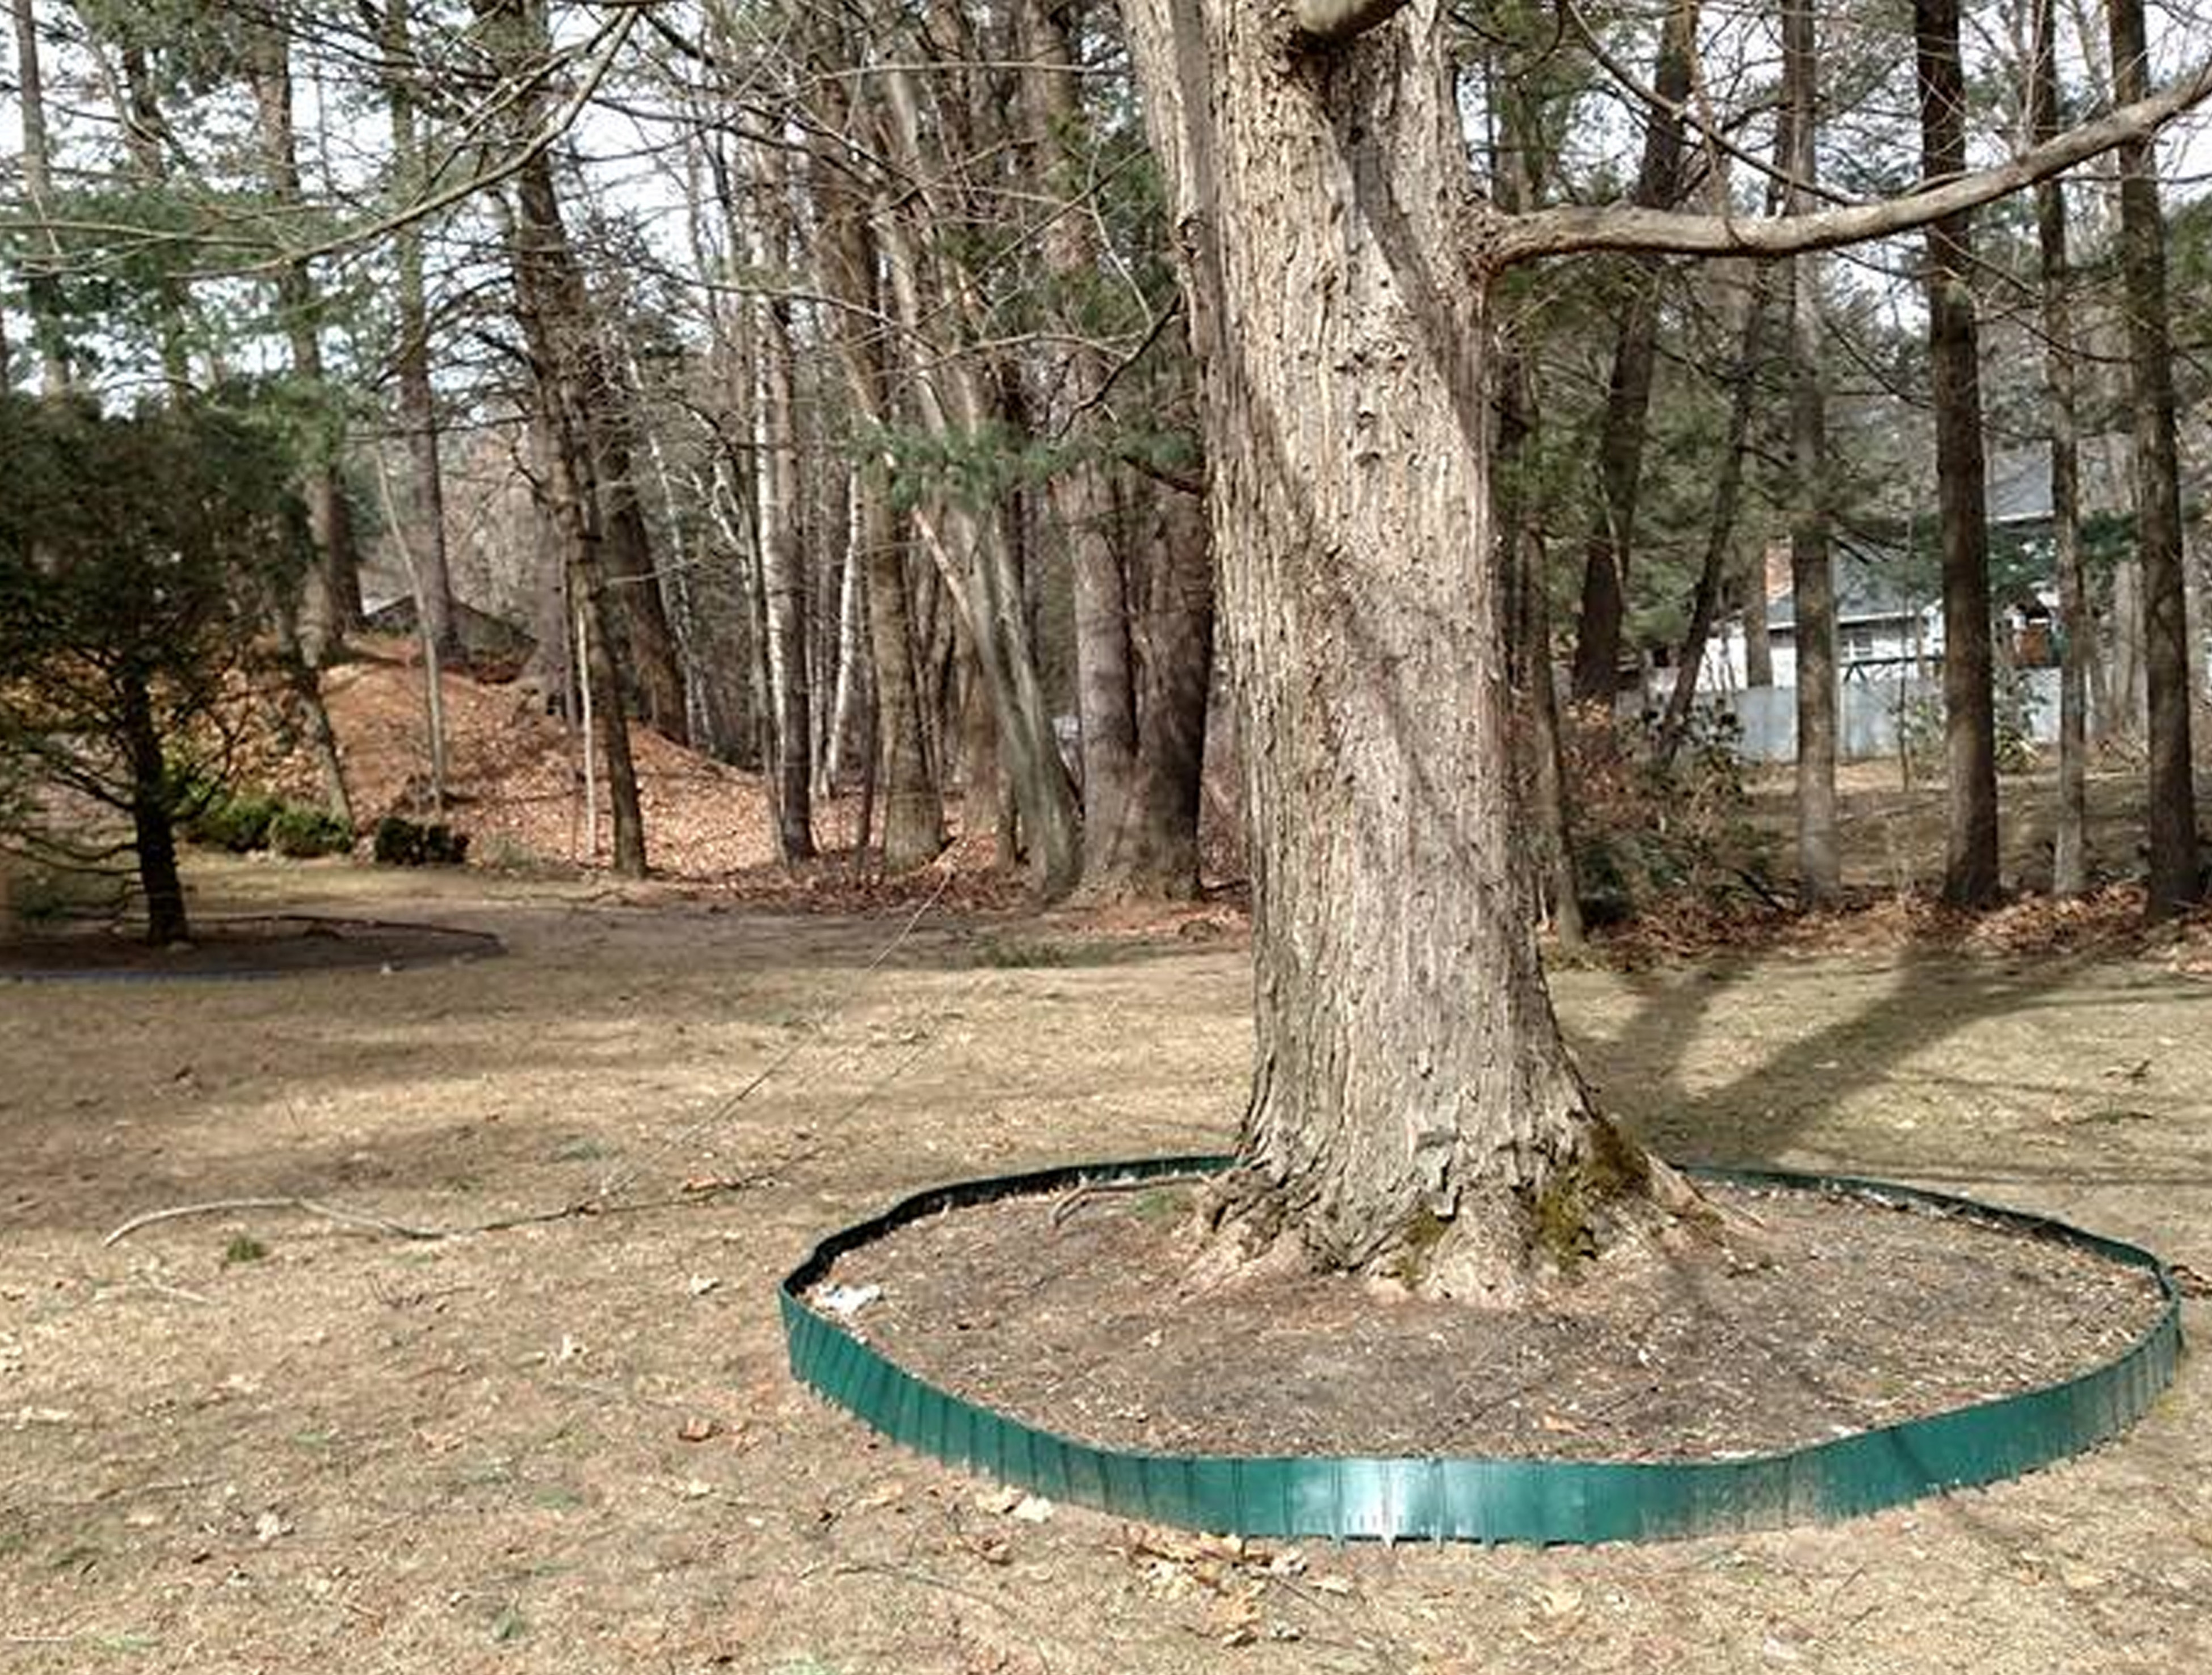 Thumbnail of an old plastic ring around a large tree holding dirt